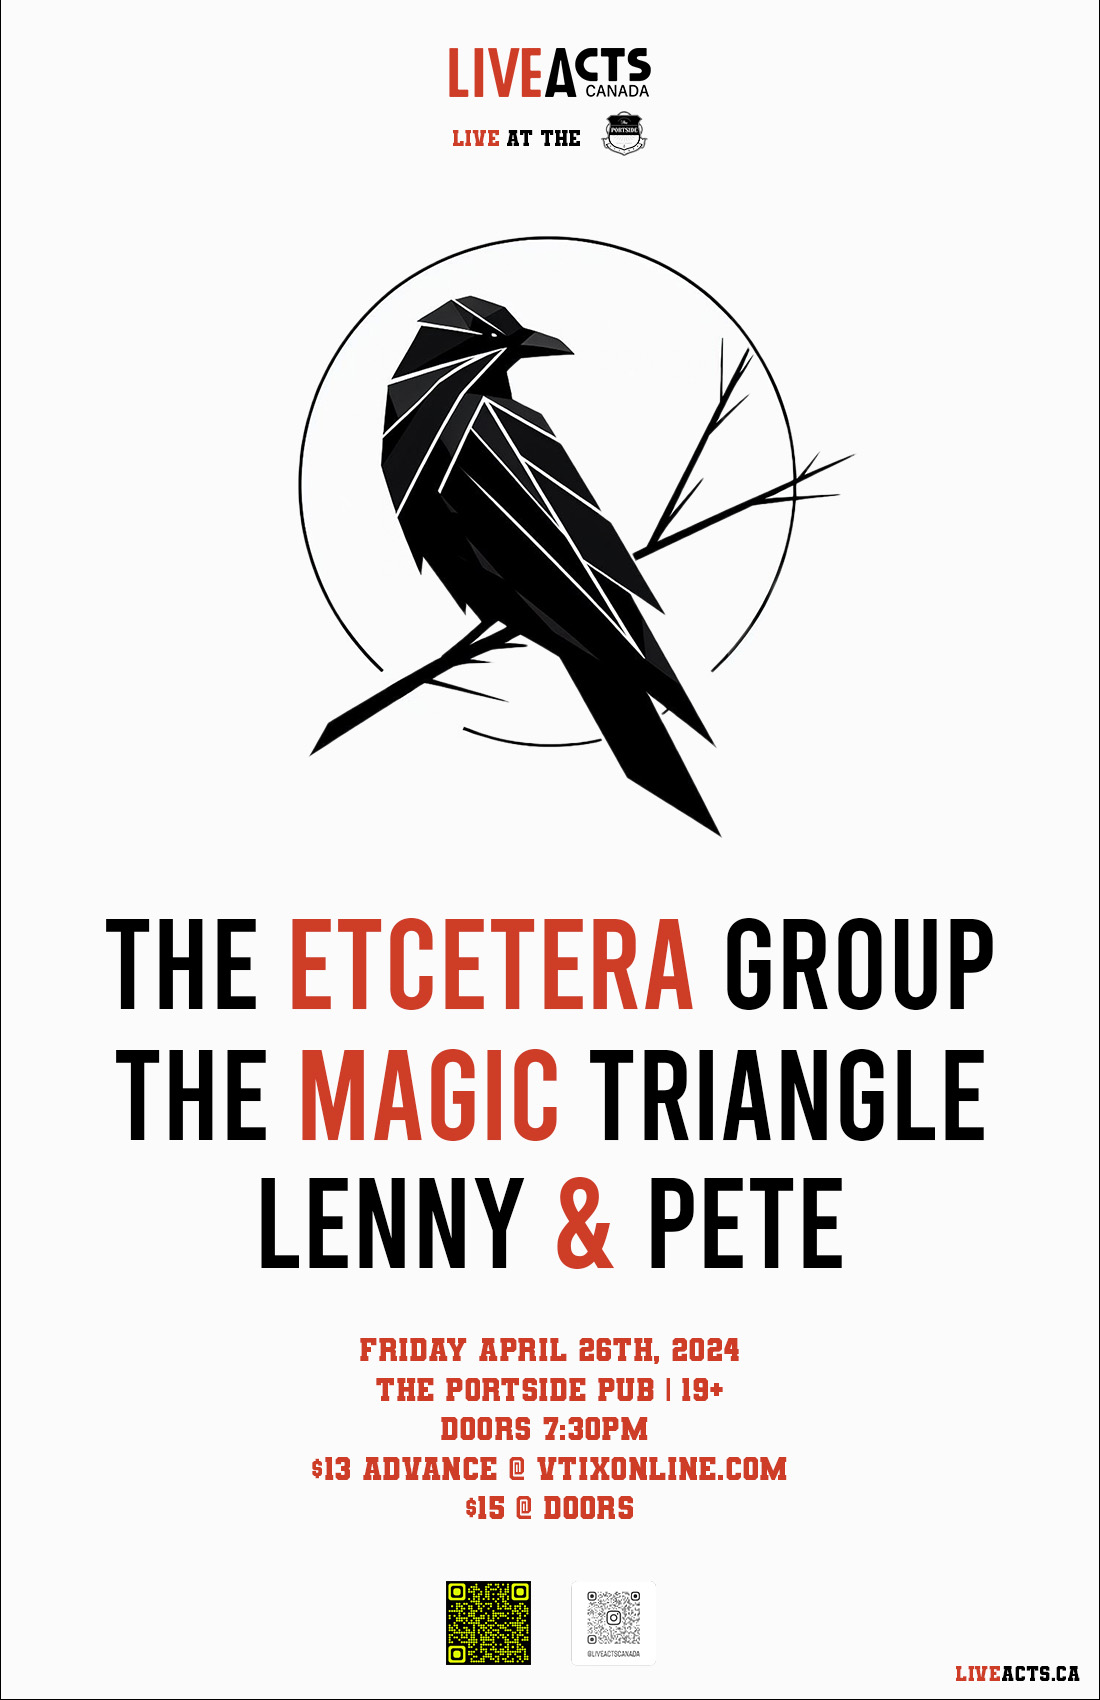 The Etcetera Group w/ The Magic Triangle, Lenny & Pete